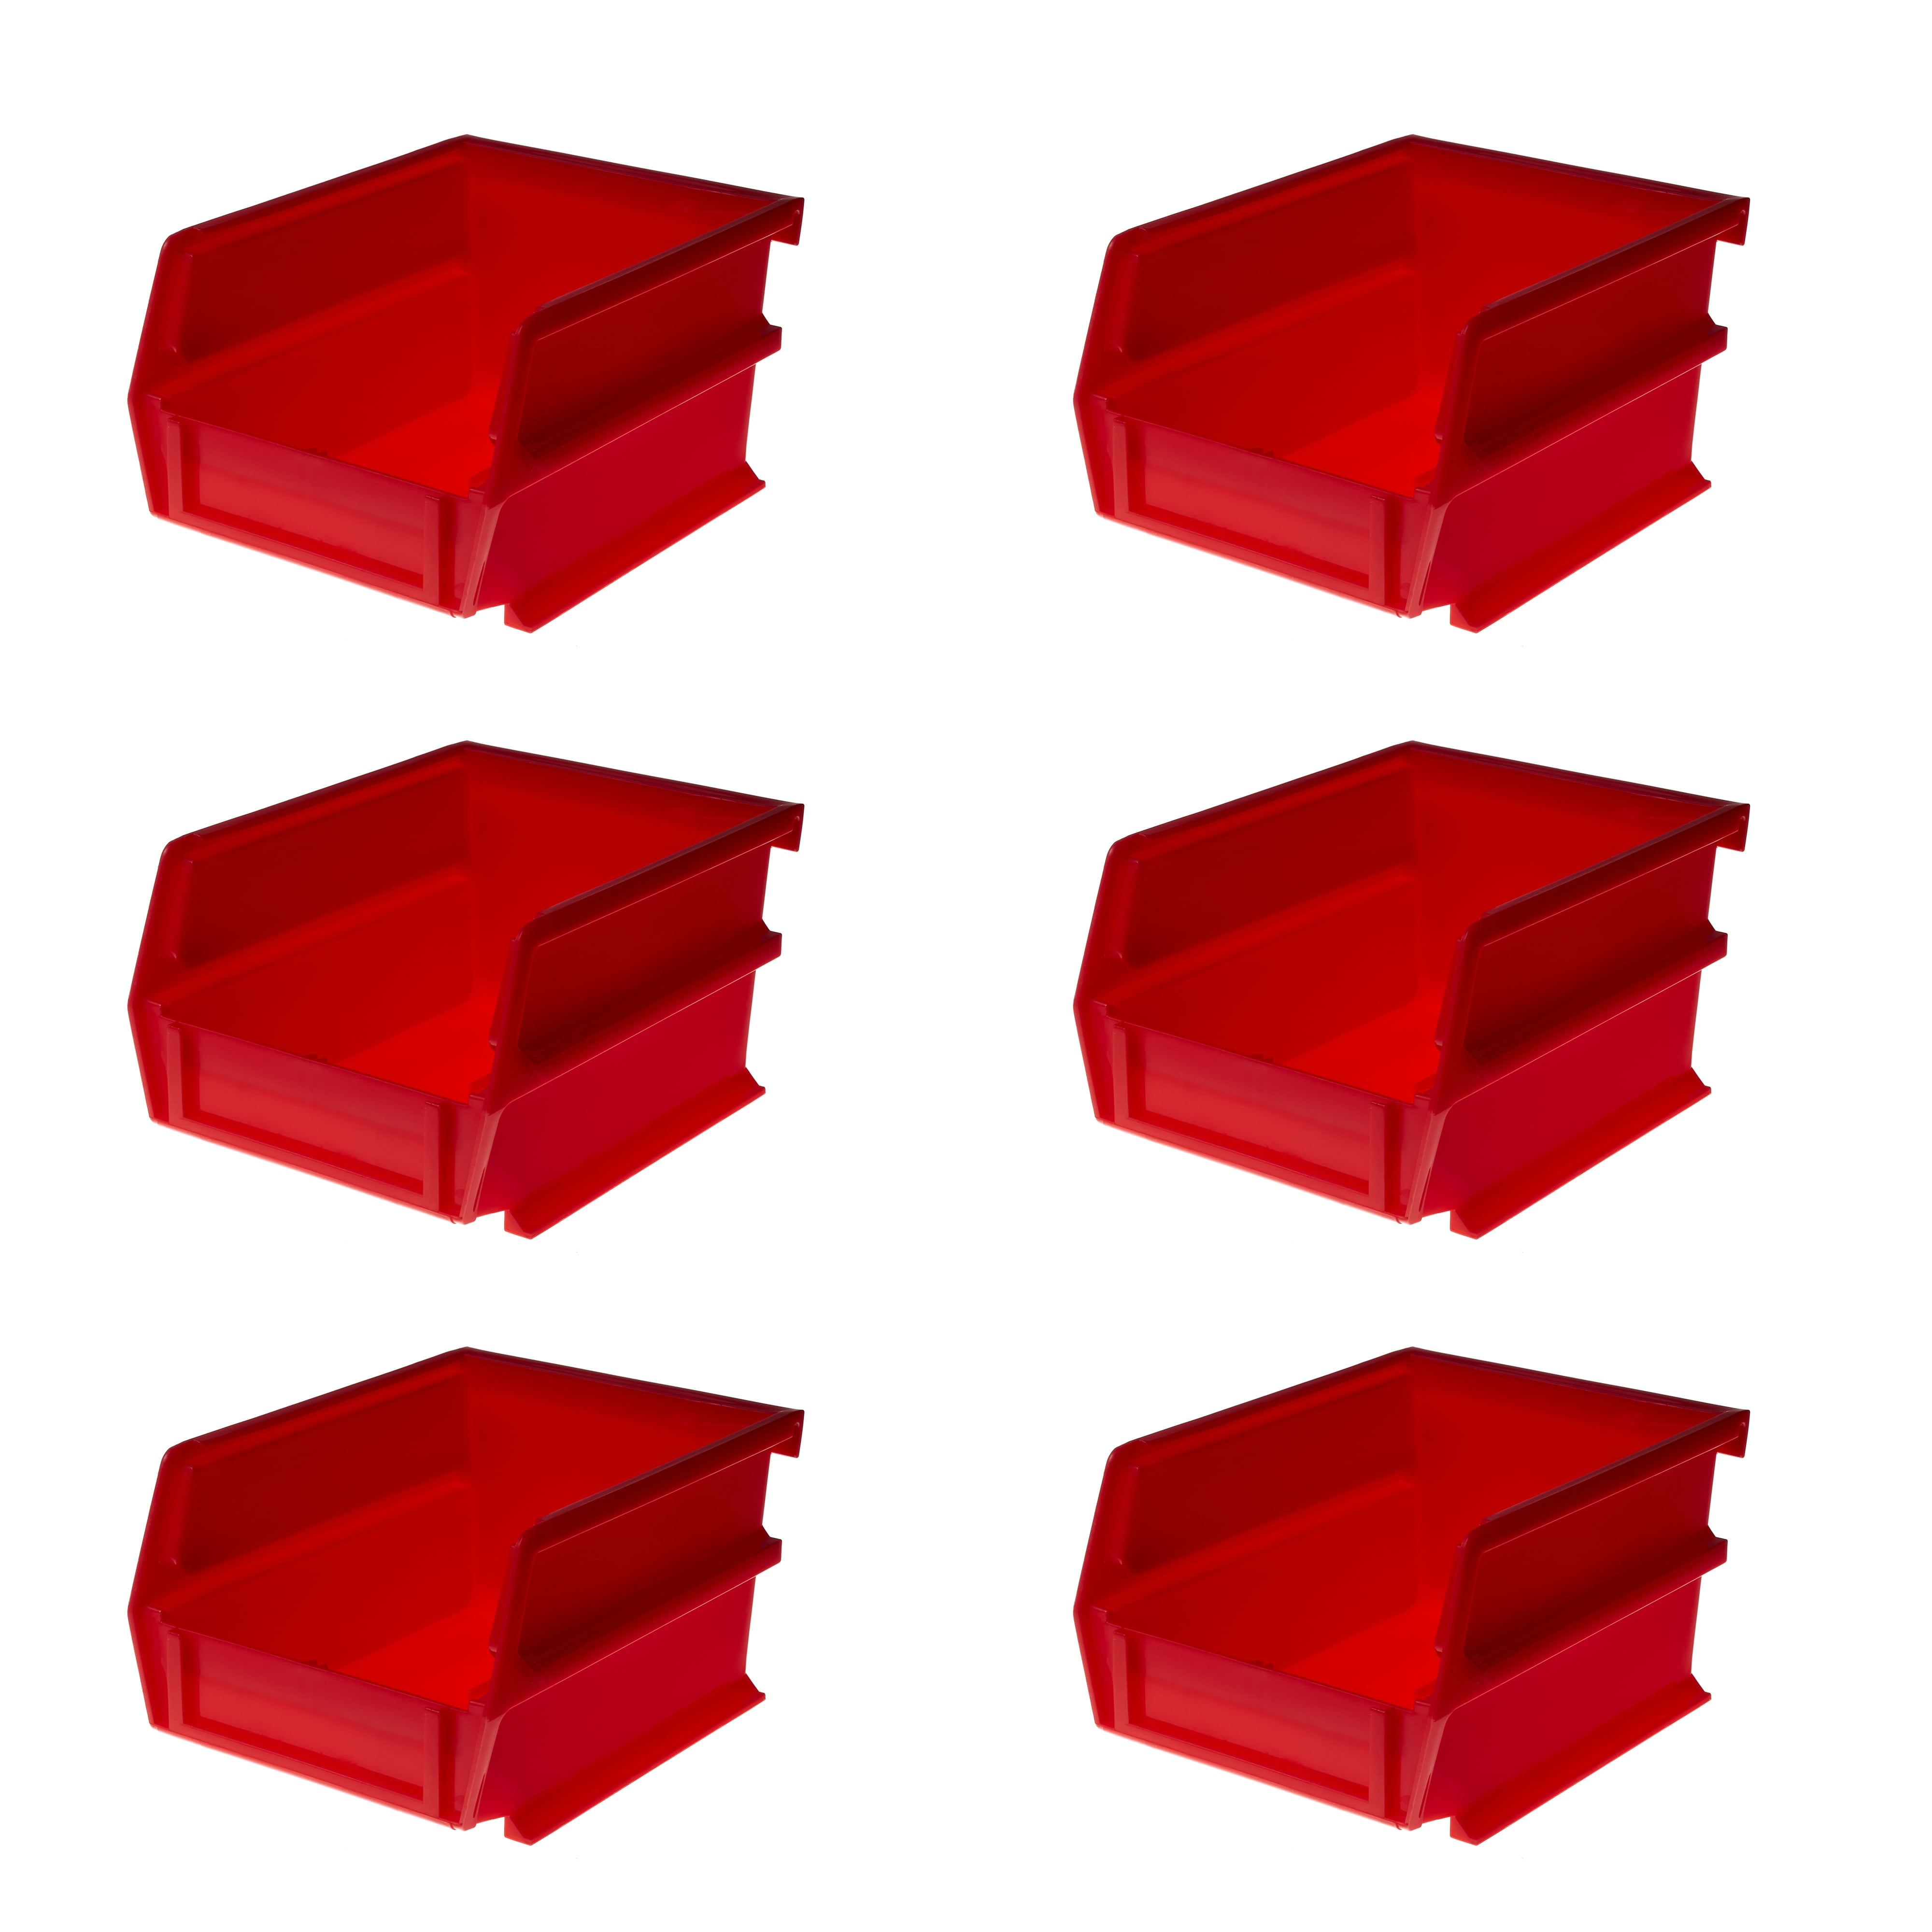 Plastic RED BOARD BIN 4 PACK Tool Workbench PEGBOARD NOT INCLUDED 